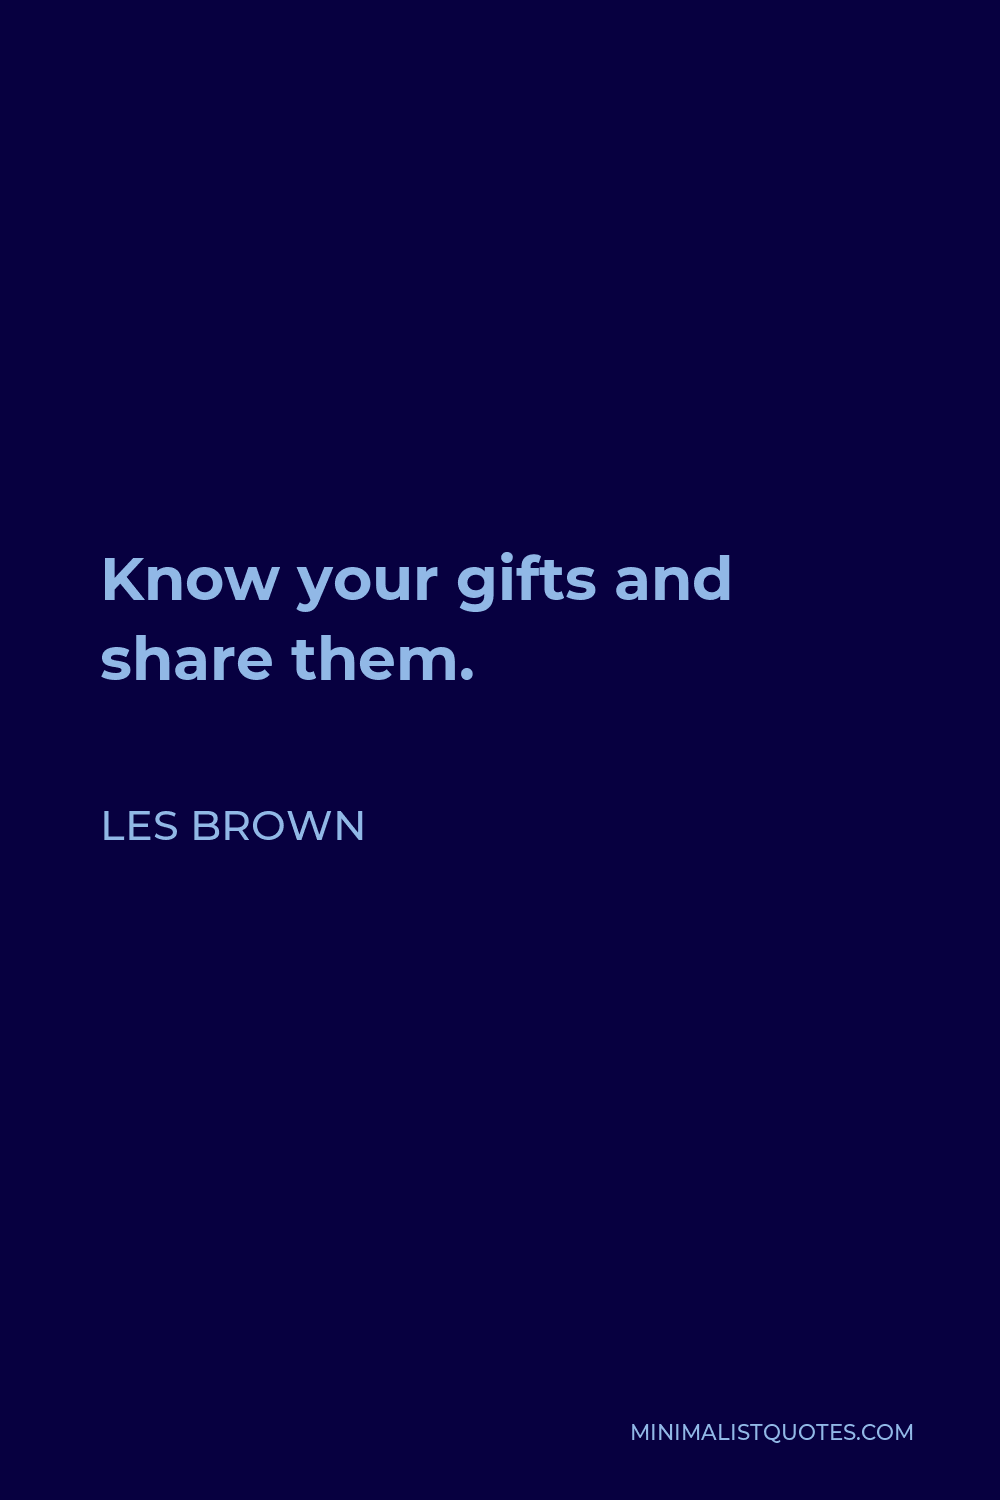 Les Brown Quote - Know your gifts and share them.